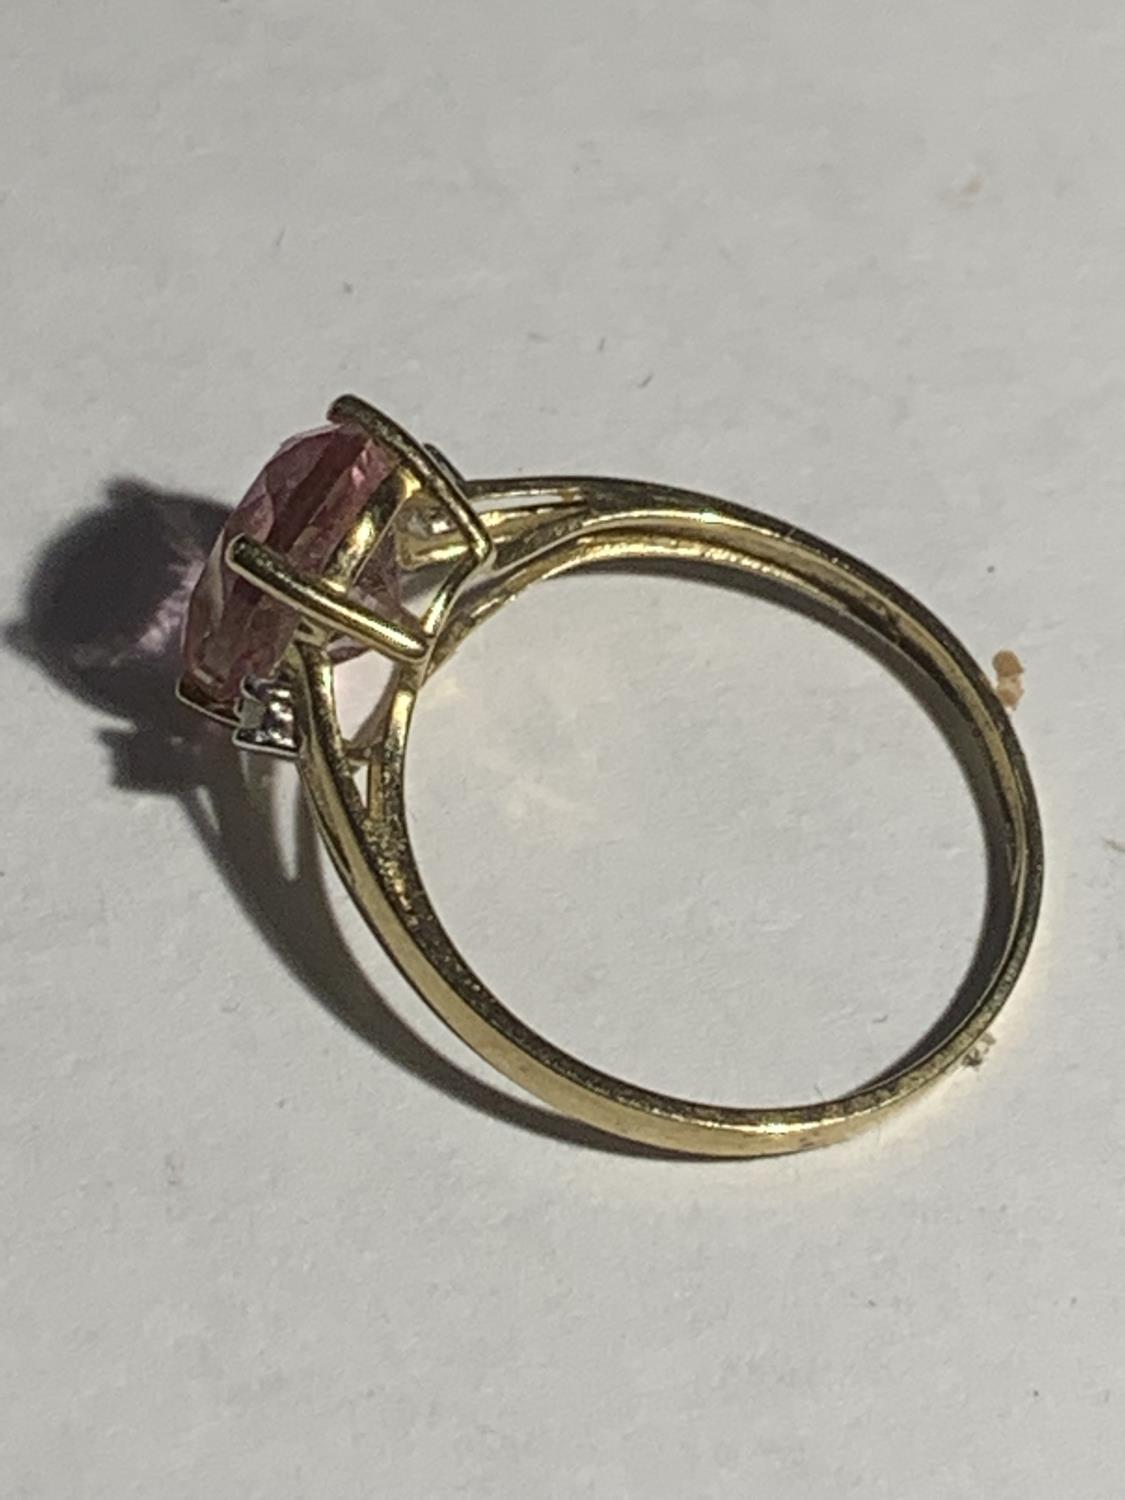 A 9 CARAT GOLD RING WITH A LARGE PINK CENTRE STONE SIZE Q GROSS WEIGHT 1.7 GRAMS - Image 3 of 3